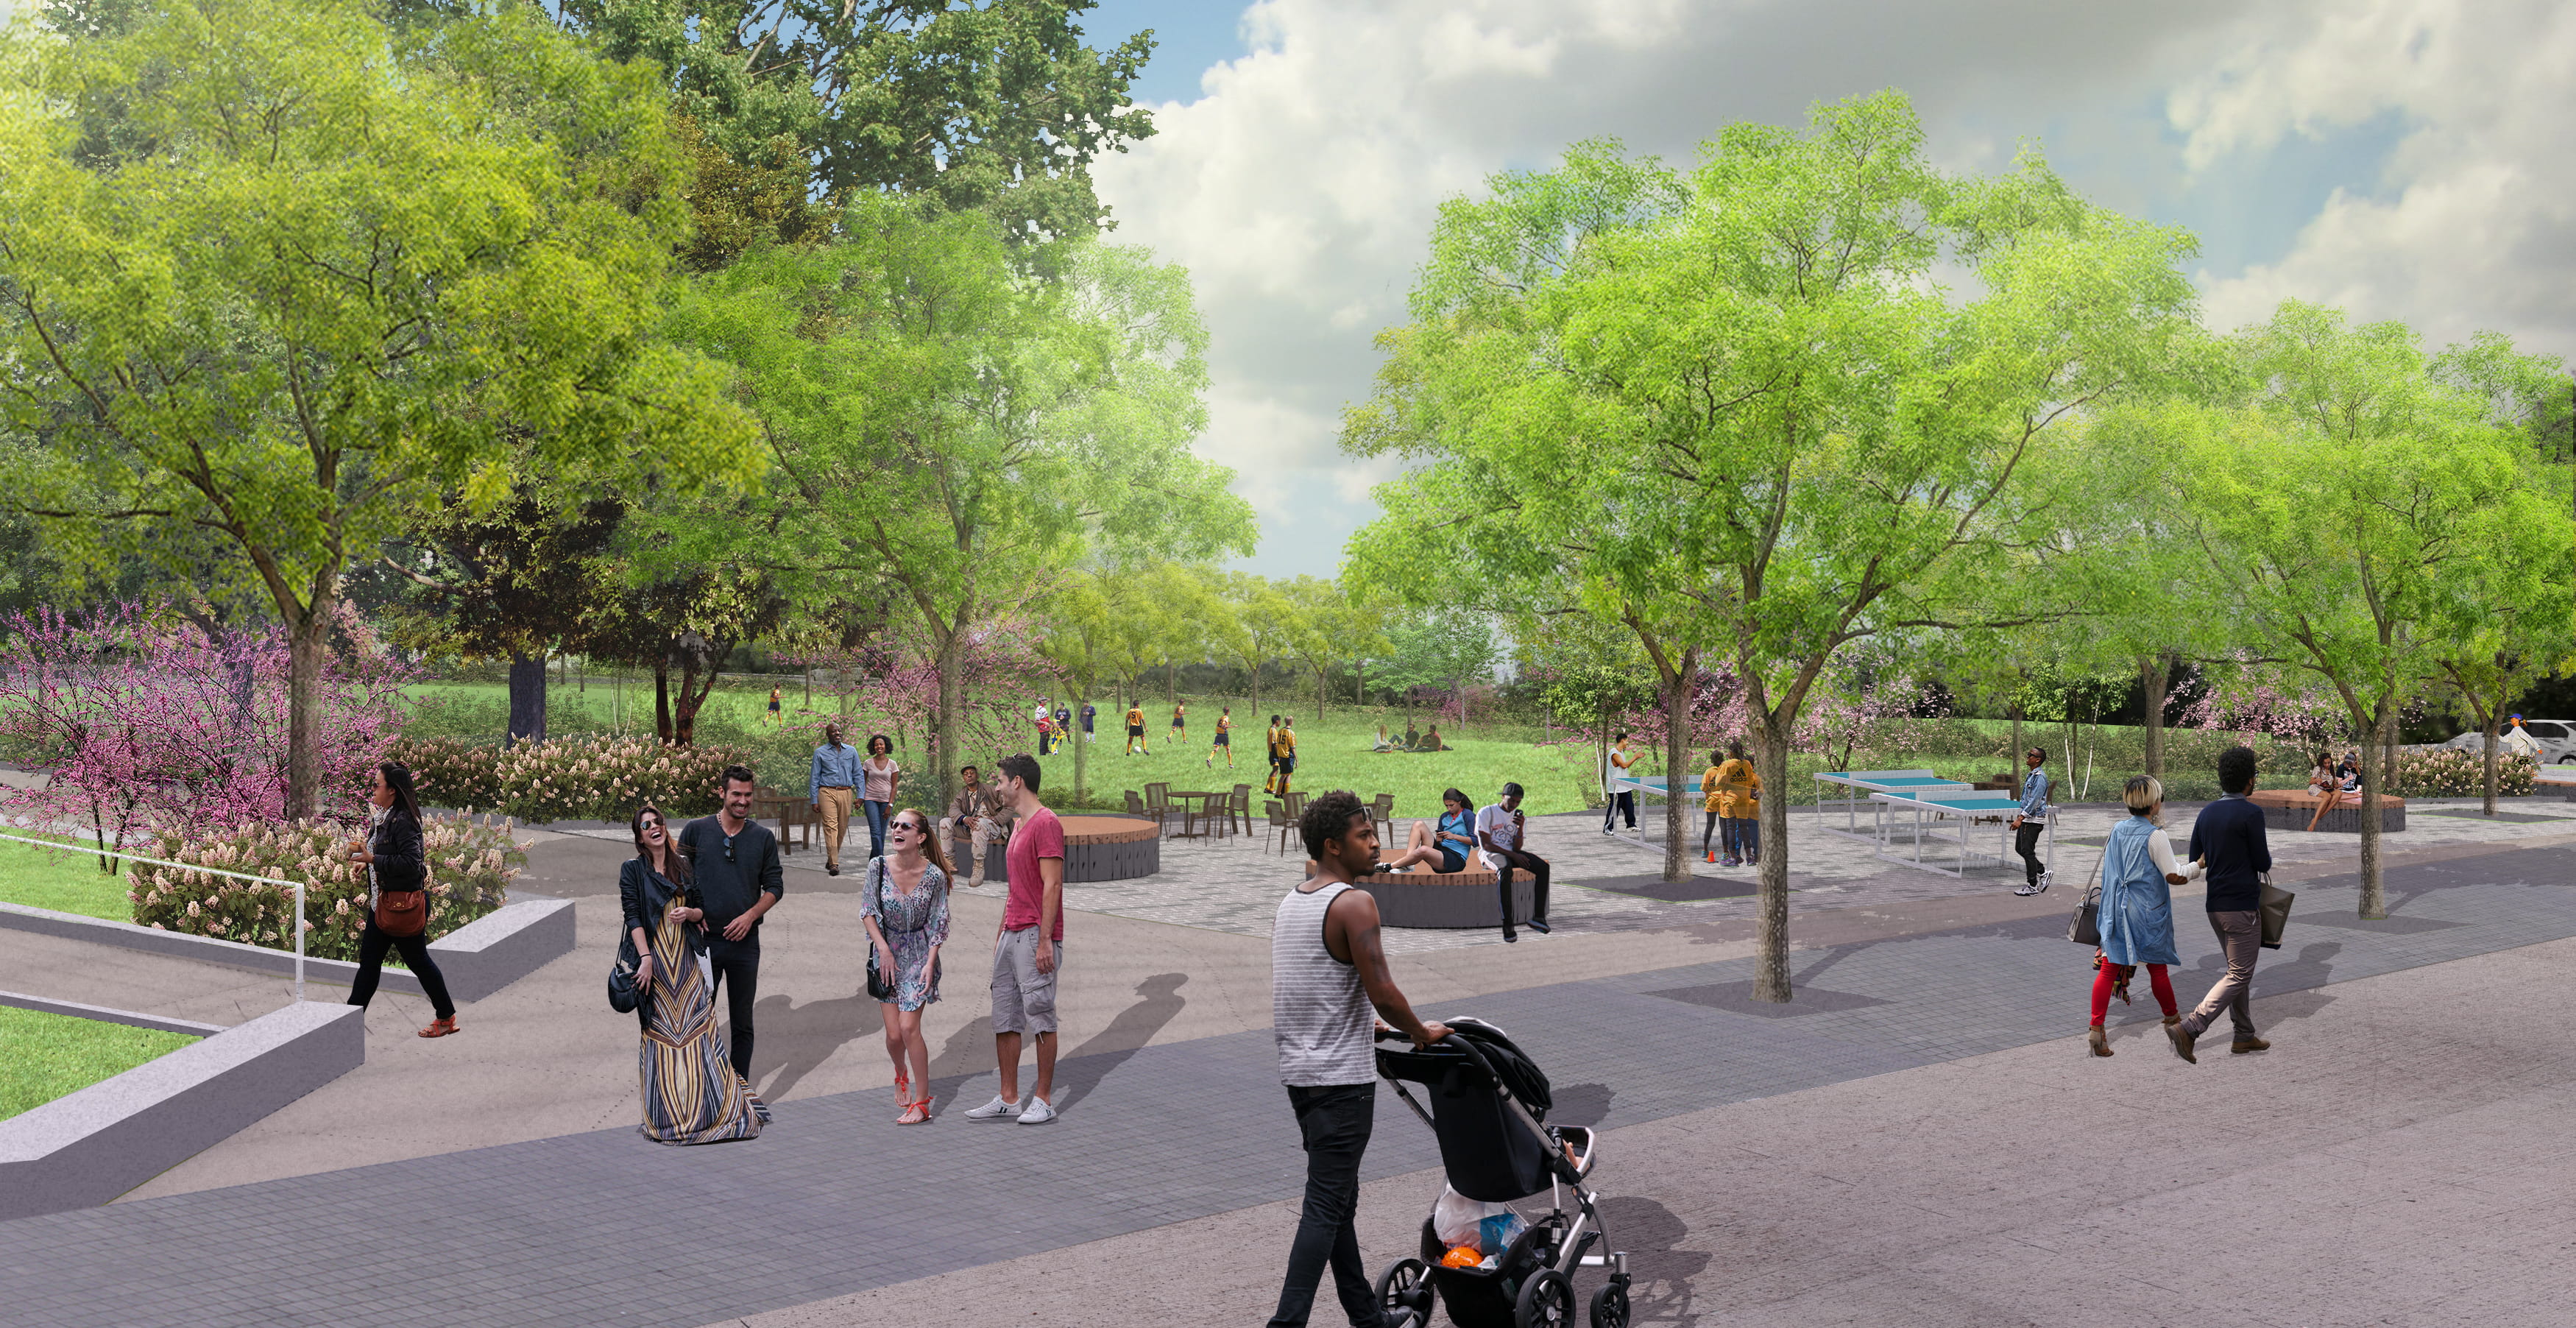 Another rendering showing a possible look at the new green space. Image courtesy of Andropogon Associates.